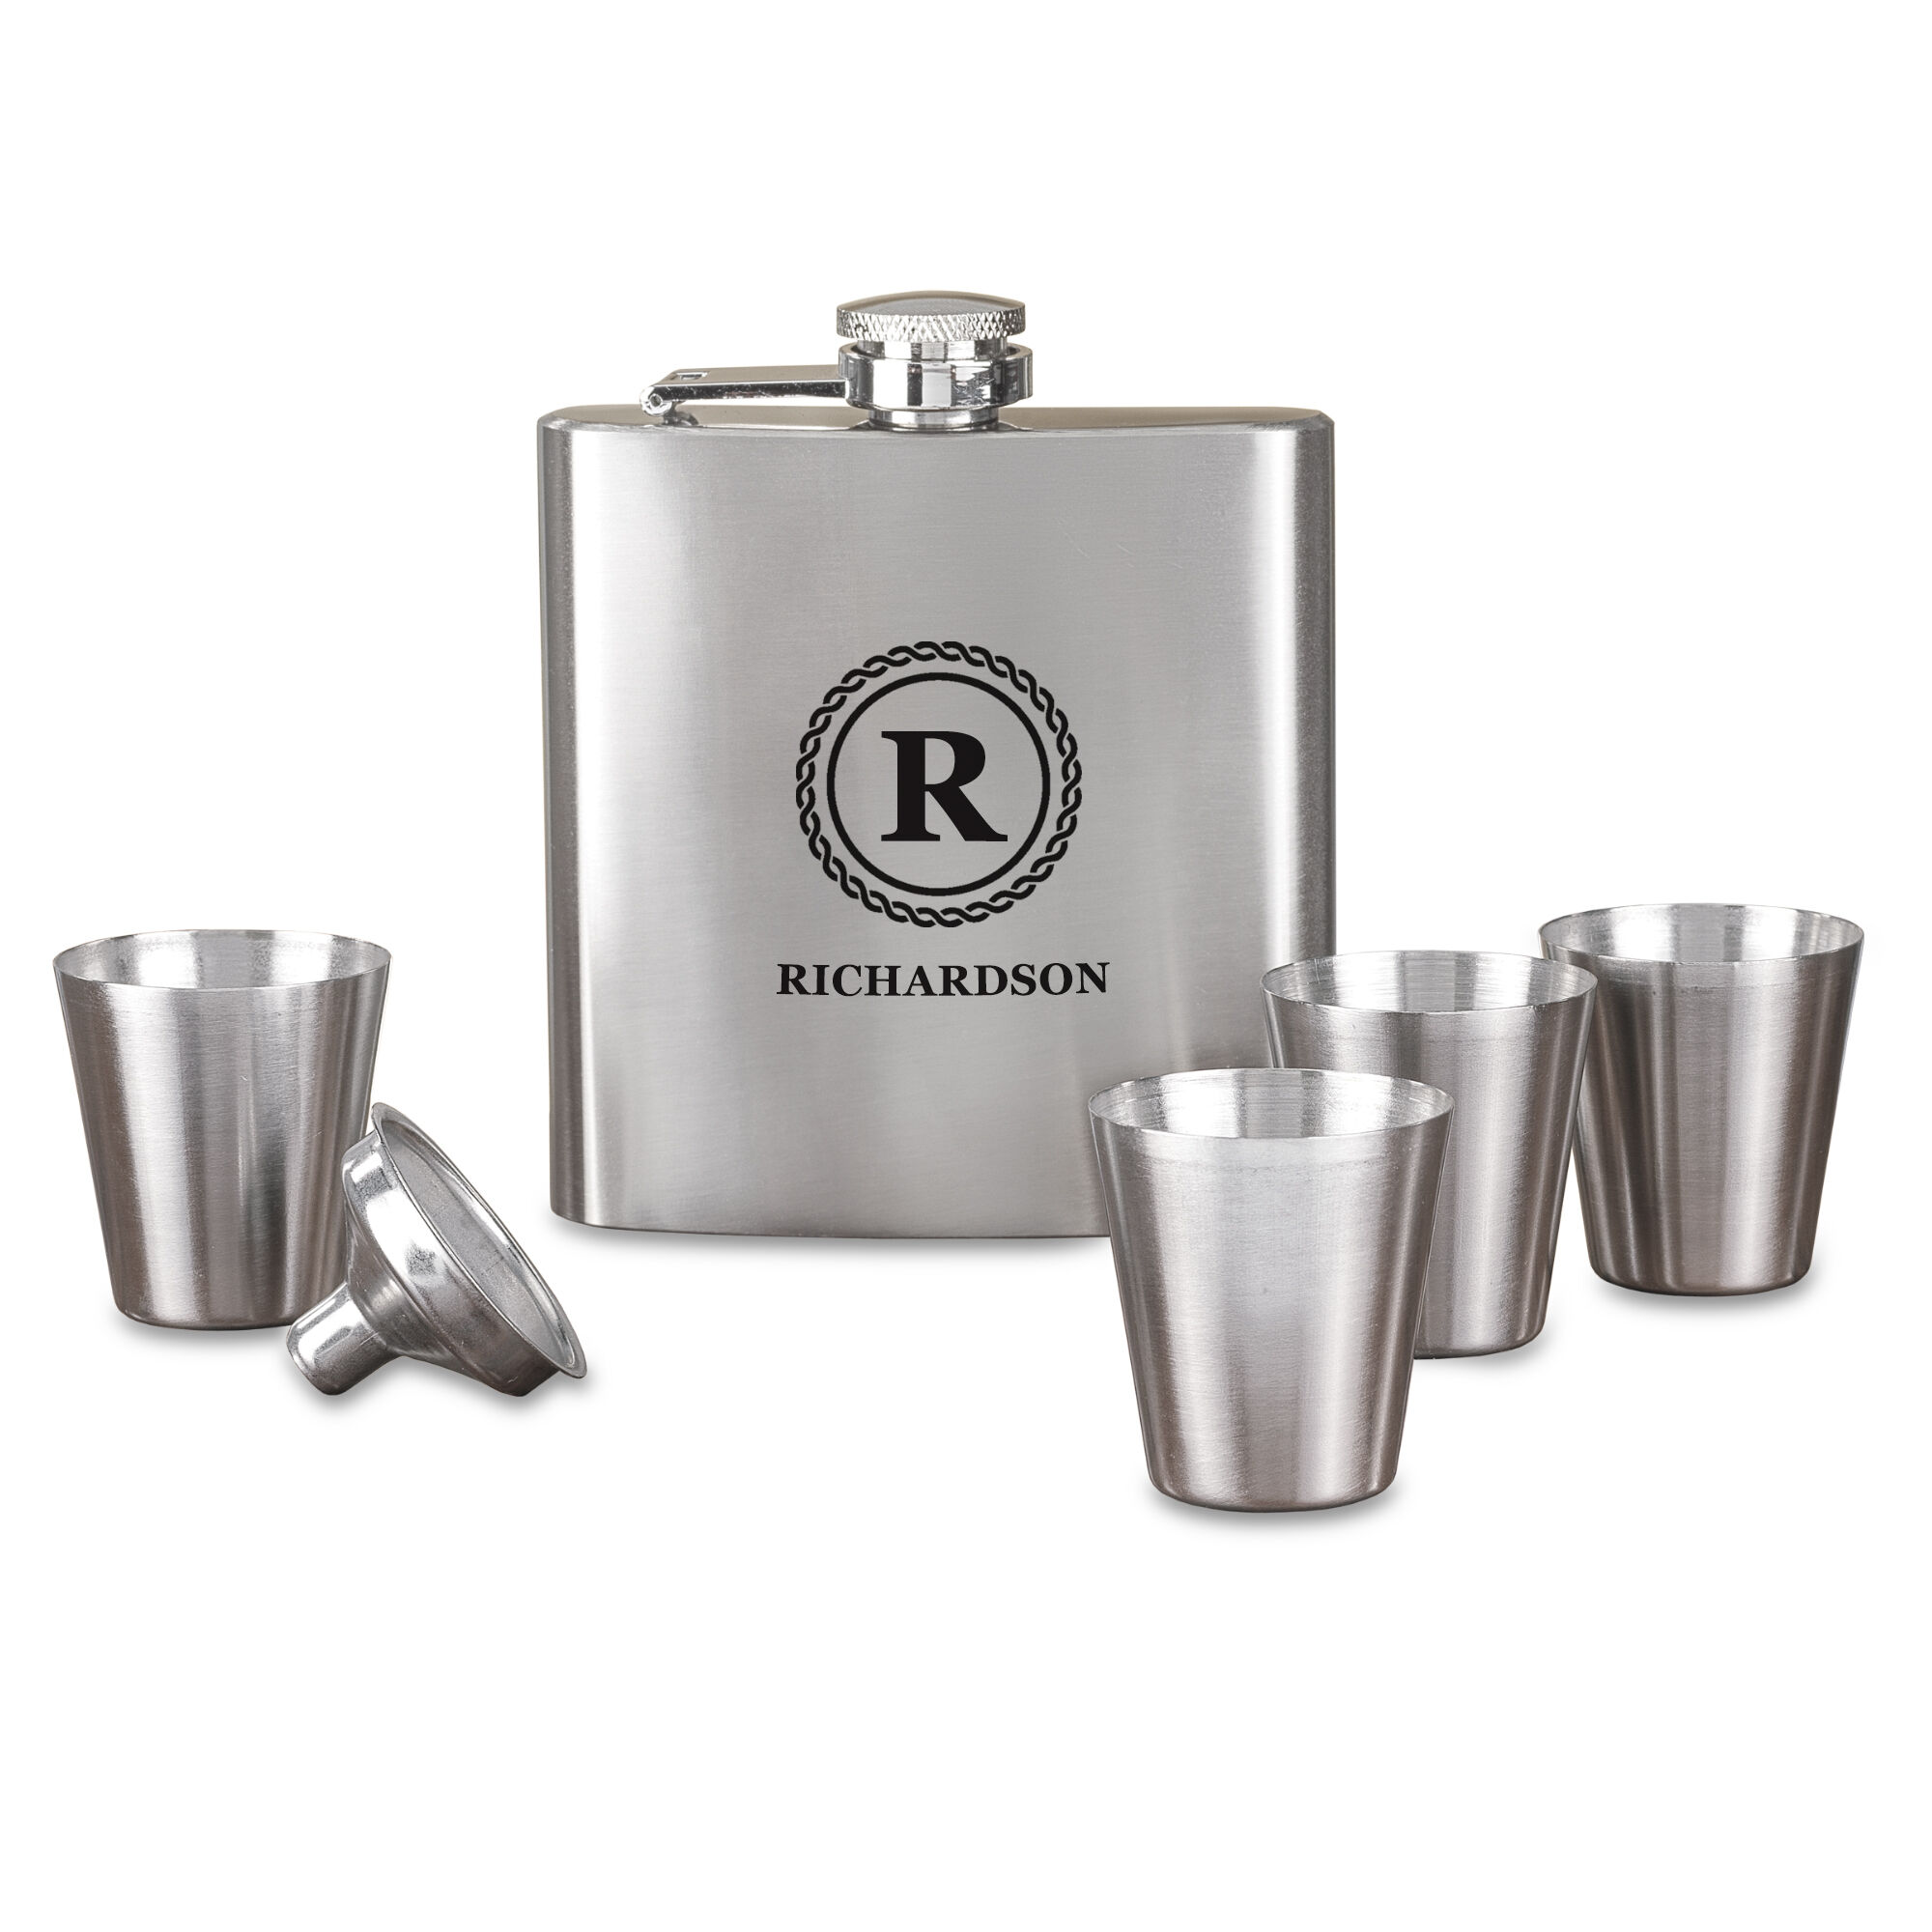 The Personalized Flask Set 10736 0018 a main